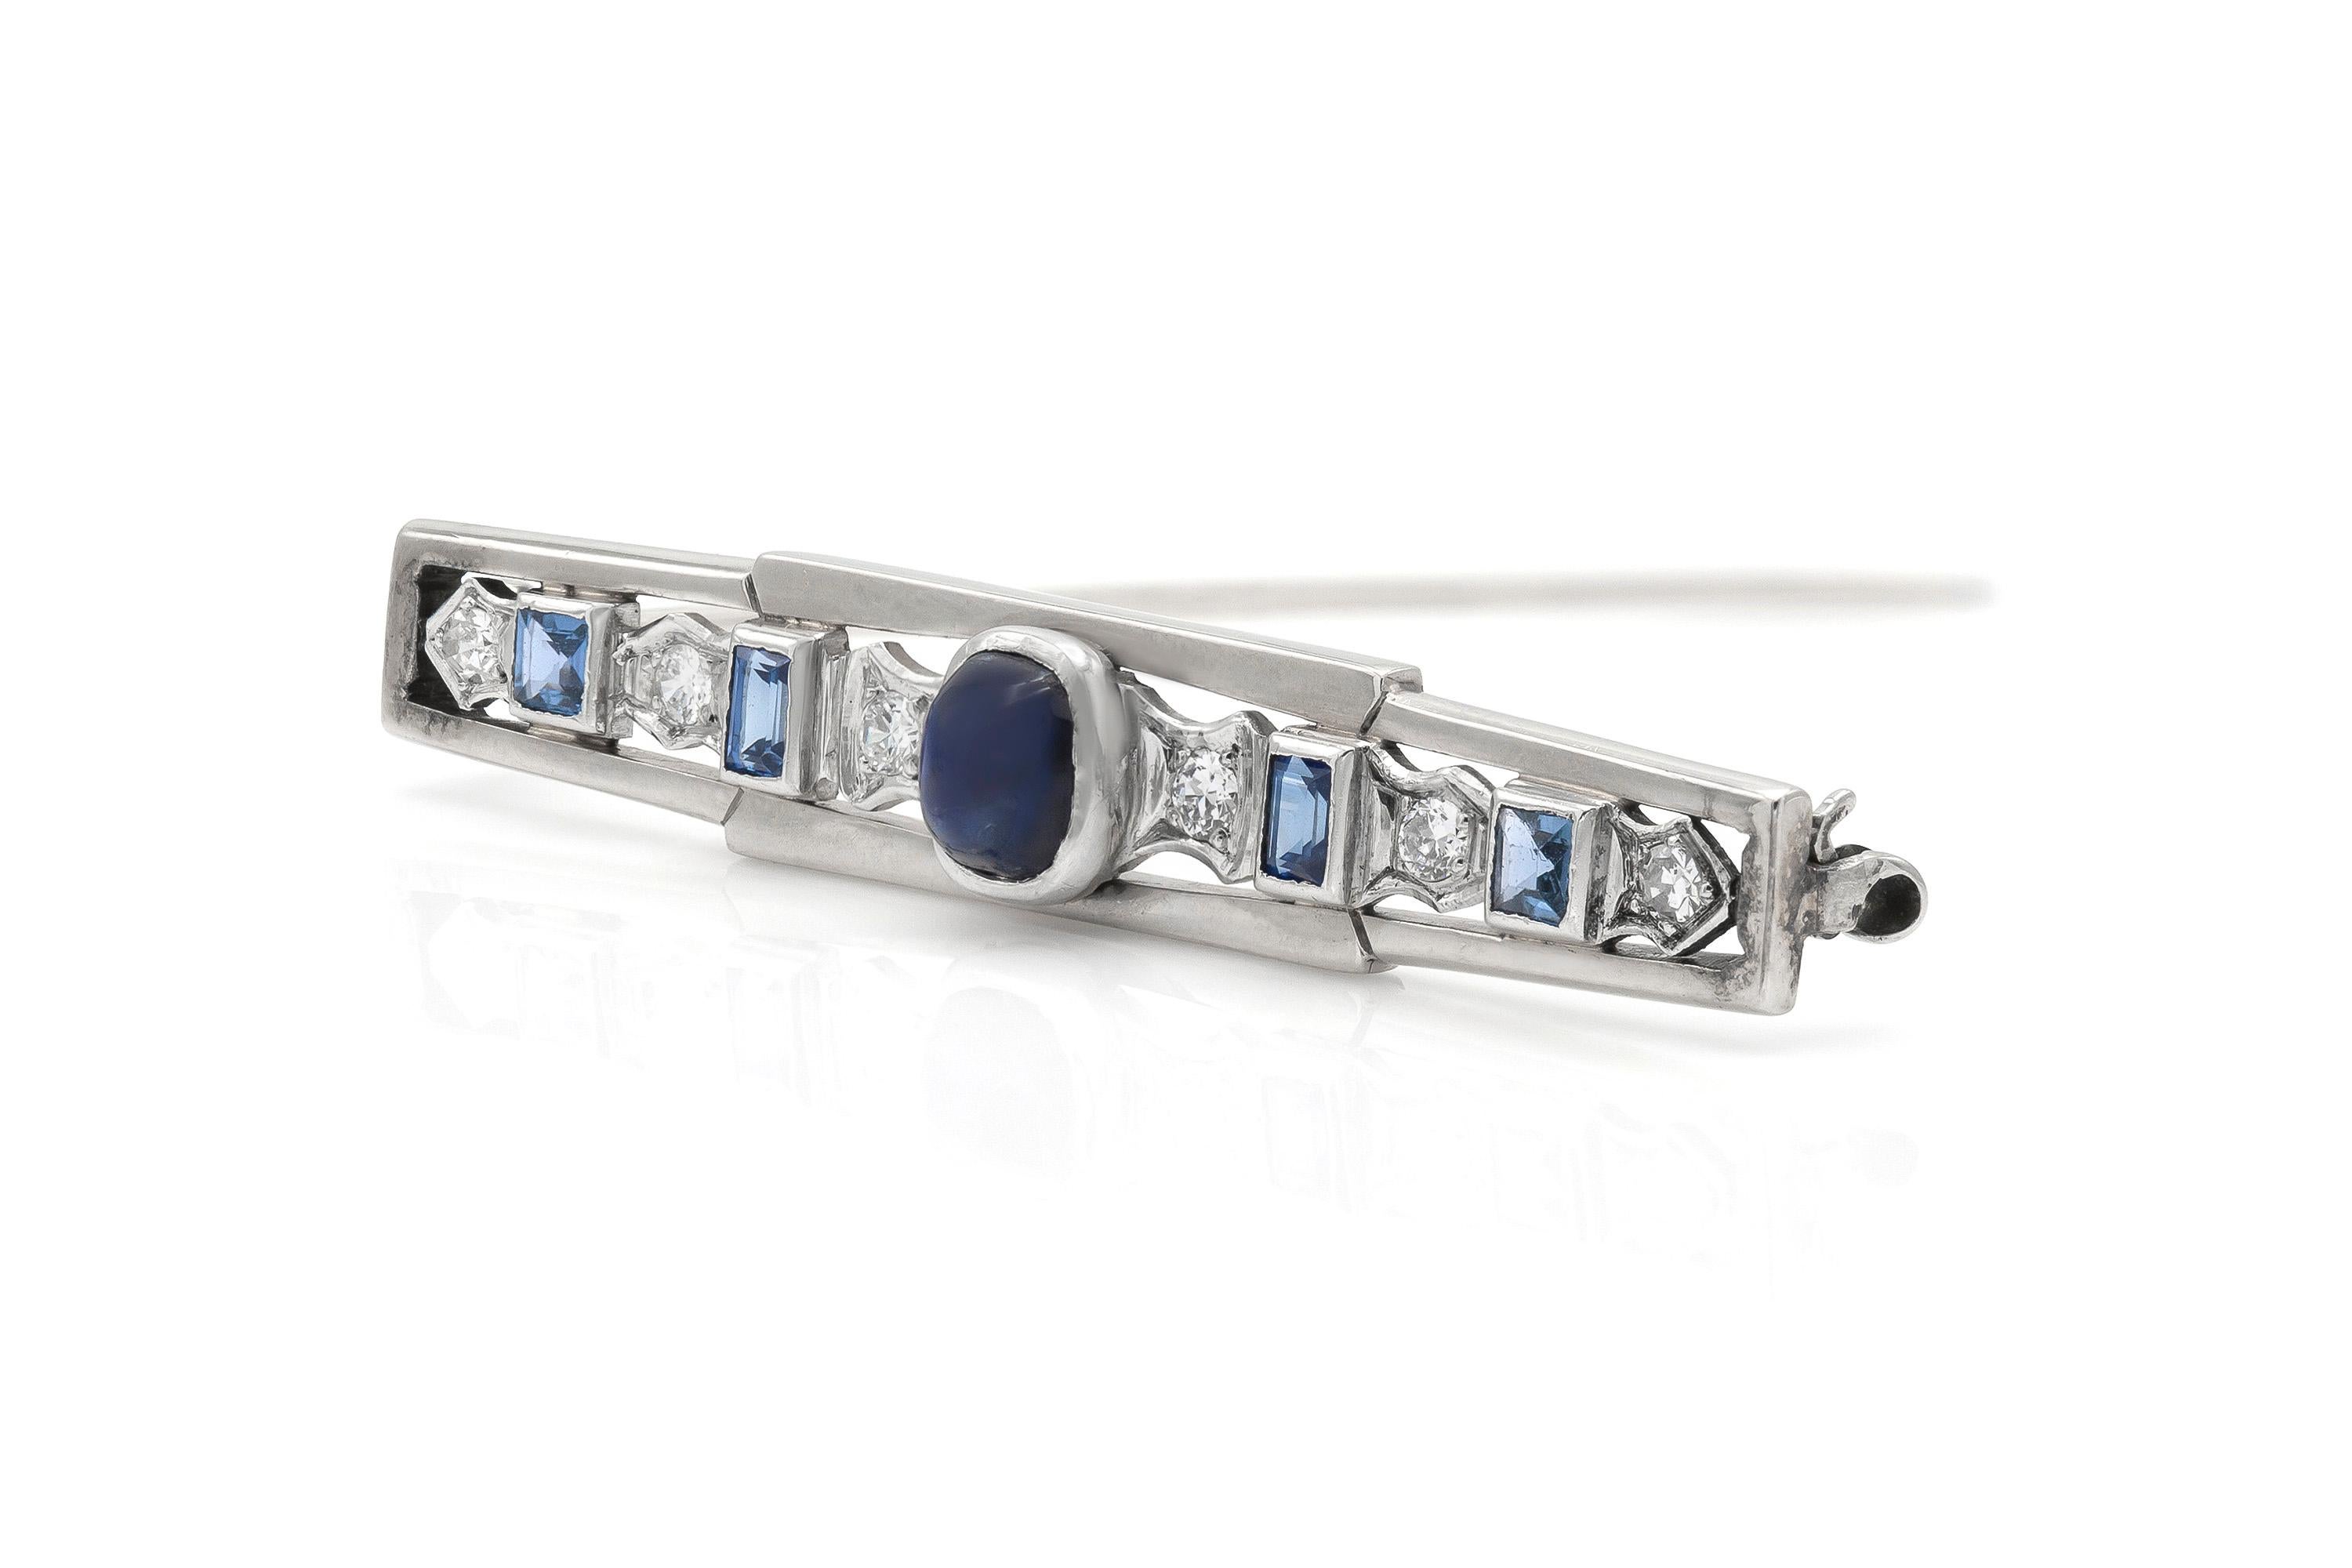 Finely crafted in 15k and 10k white gold with a center Cabochon Sapphire weighing approximately 1.00 carat. The pin features squre and rectangle cut Sapphires weighing approximately a total of 0.60 carats and Diamonds weighing approximately a total